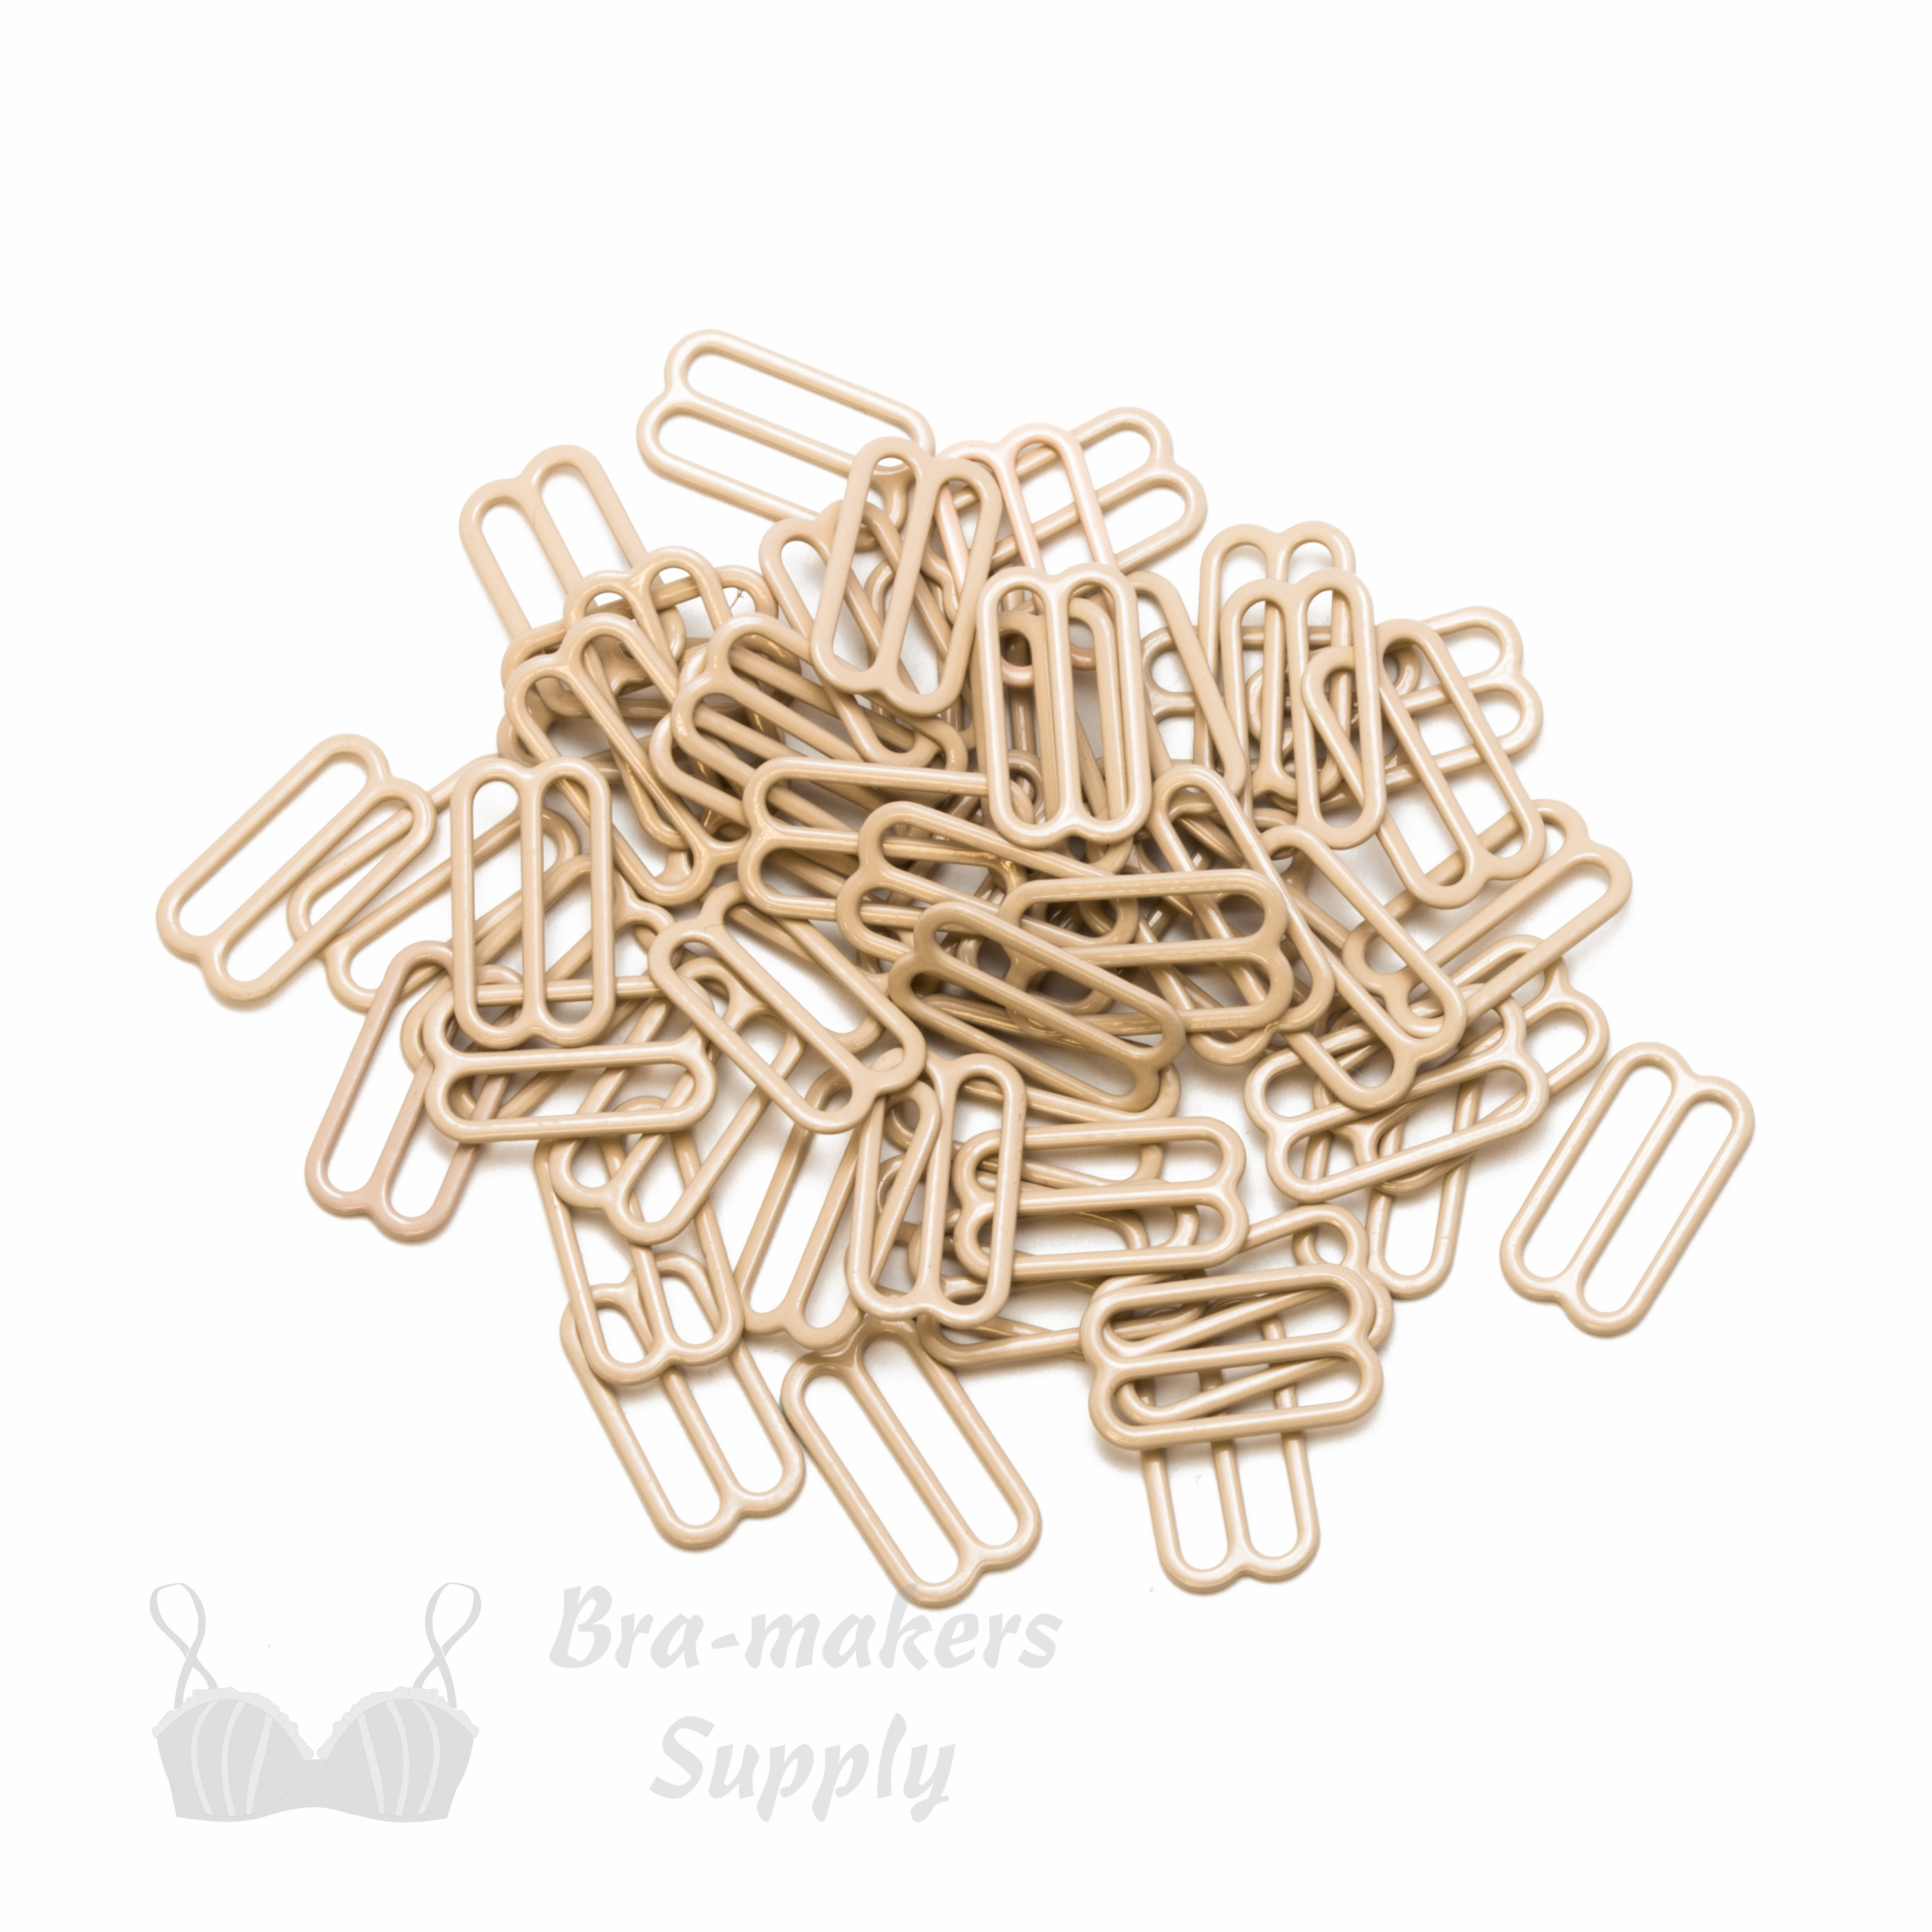 five eighths inch 16mm RM-600 S beige nylon coated metal rings sliders or frappe Pantone 14-1212 from Bra-Makers Supply 100 sliders shown